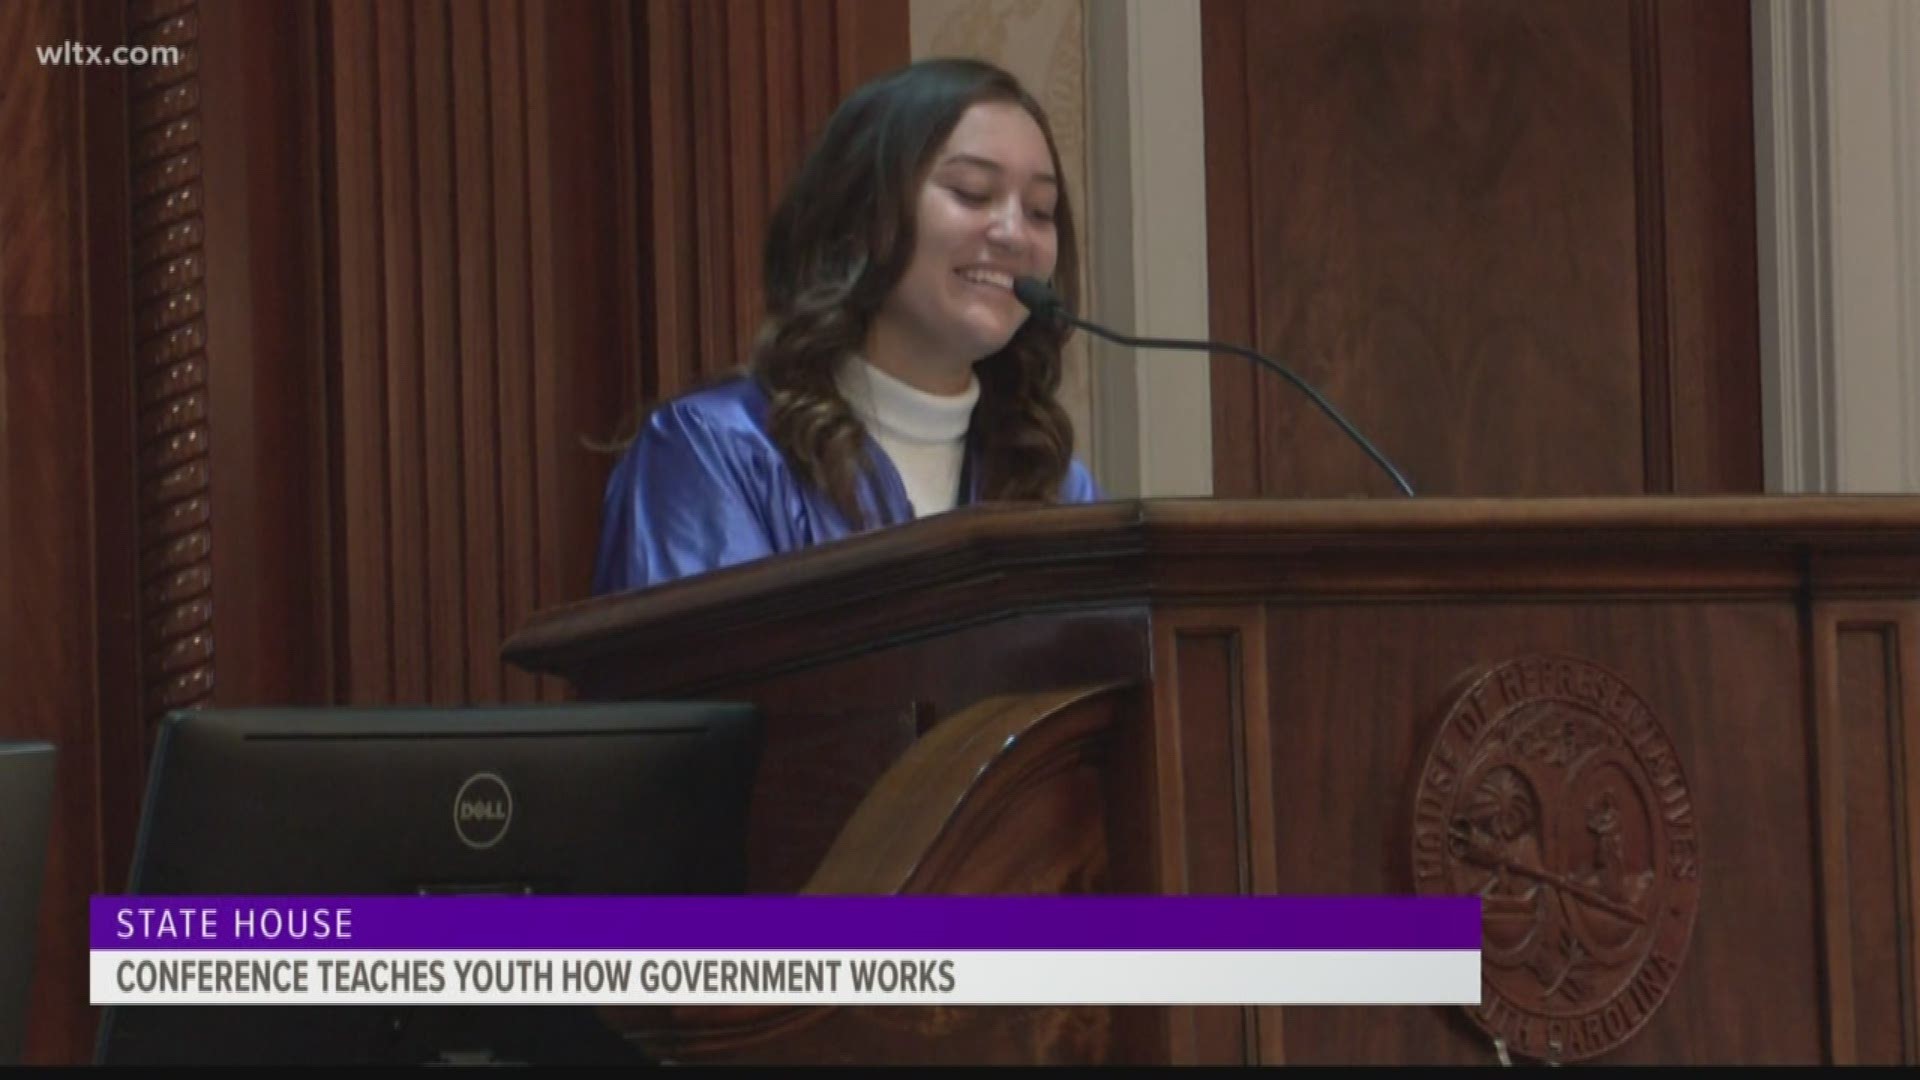 More than 1,600 students gathered at the State House for the South Carolina YMCA's youth in government and model legislature conference, an annual event.